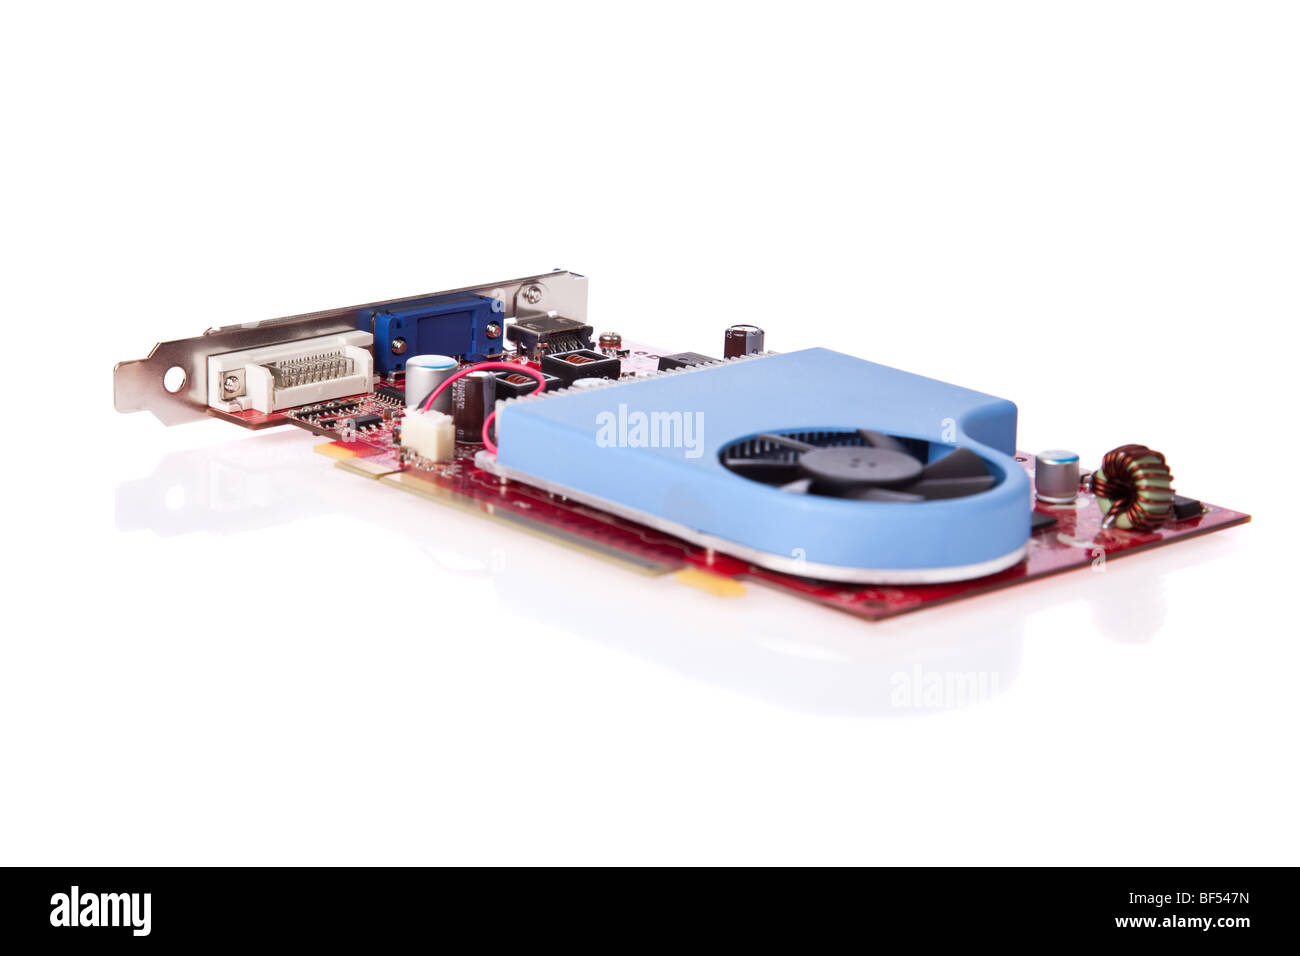 PCI express video card with cooler isolated on a white background. Focus on plugs. Stock Photo